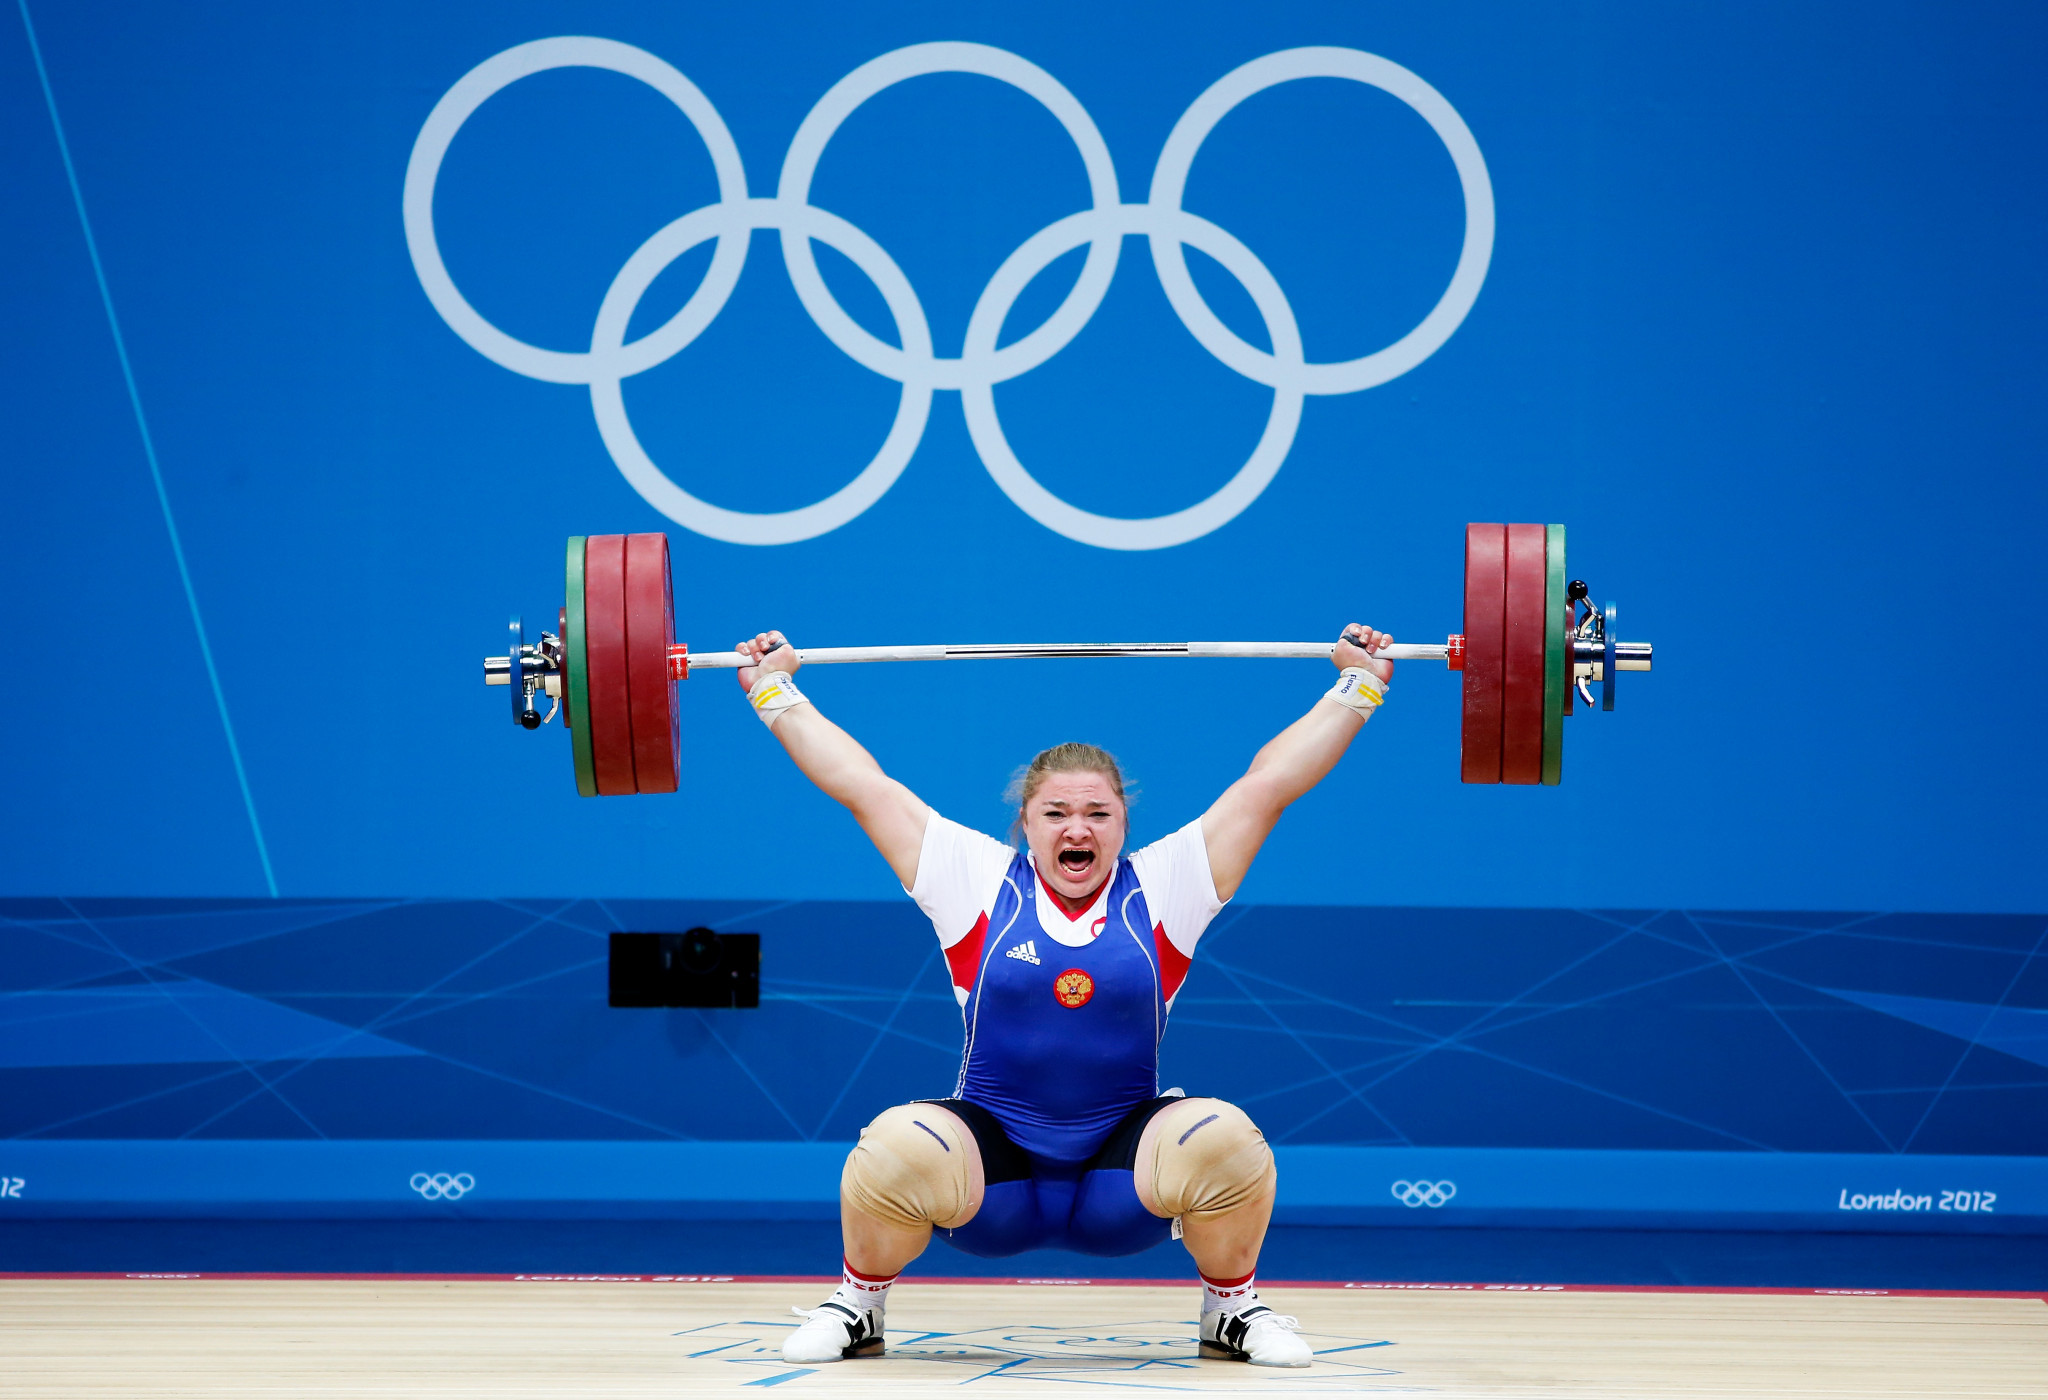 London 2012 Olympic silver medallist Tatiana Kashirina is set to return to international weightlifting competition after a four-year absence ©Getty Images